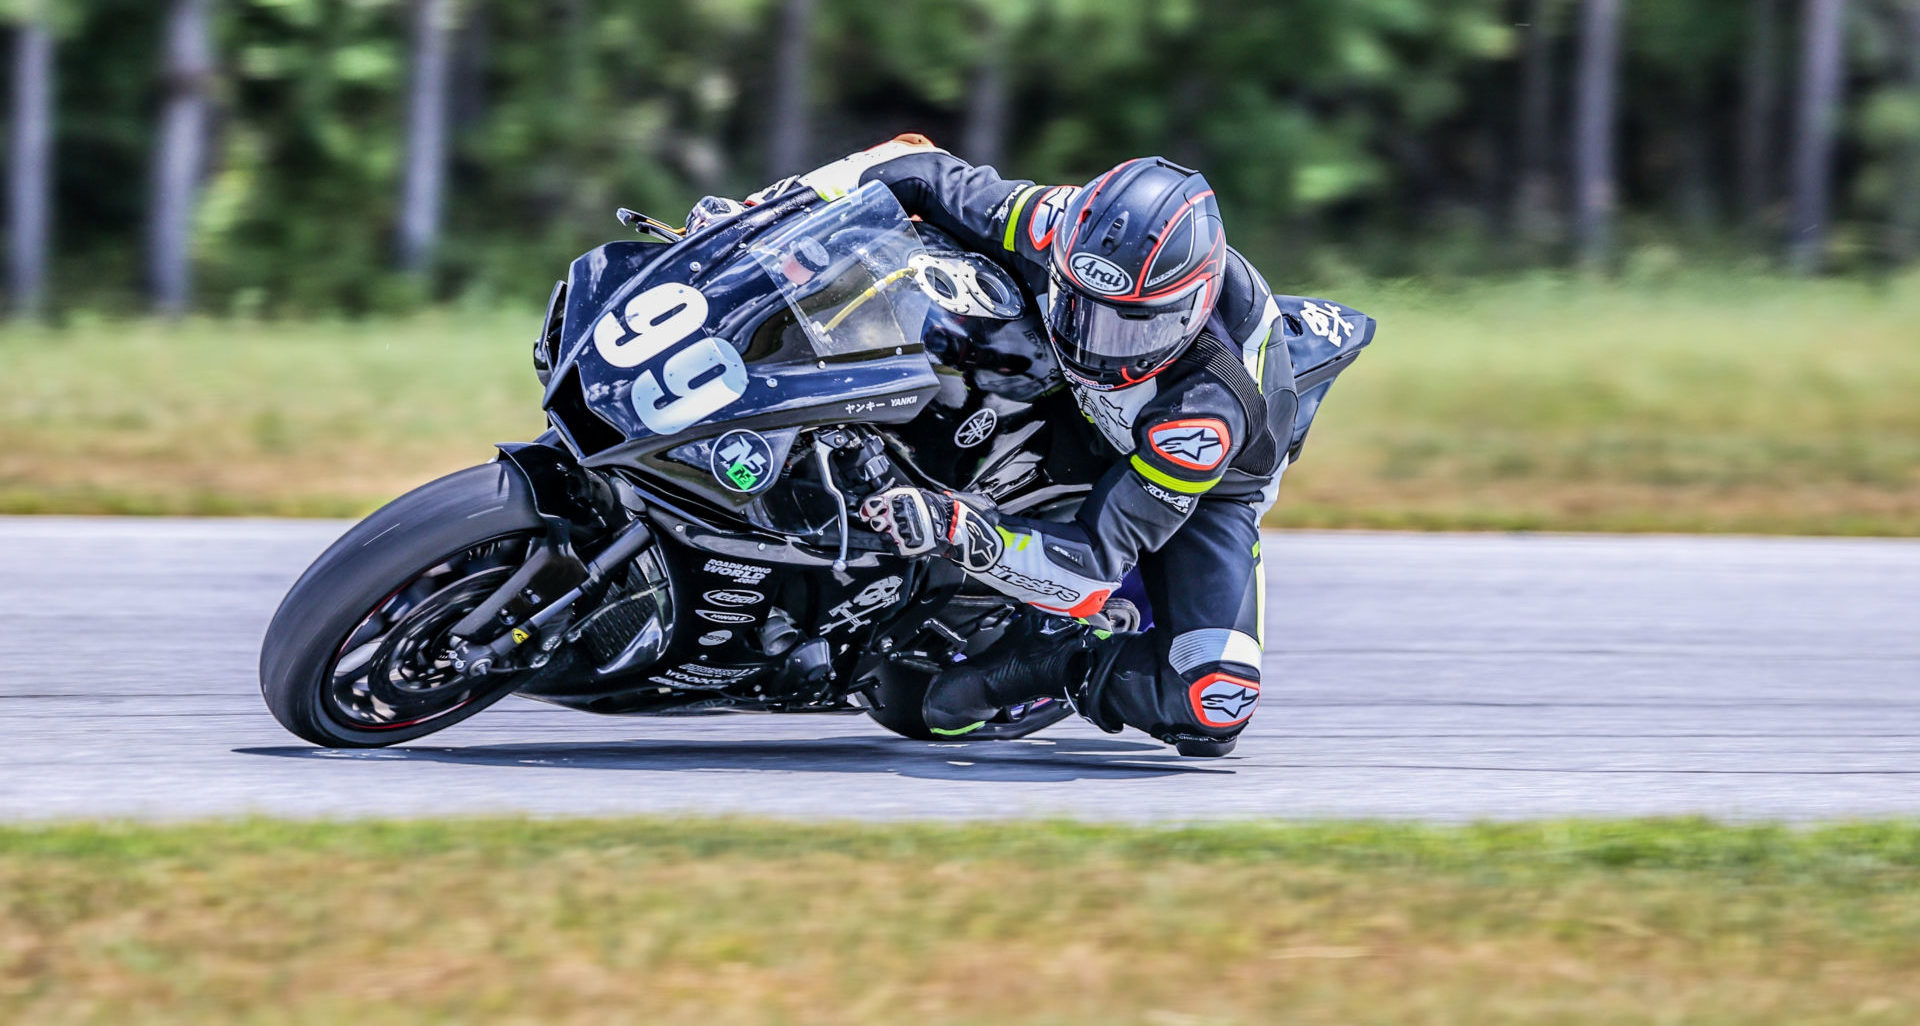 The Army of Darkness race team will be on DIABLO™ Superbike slicks for 2021. | Photo by Apex Pro Photography, courtesy Pirelli.